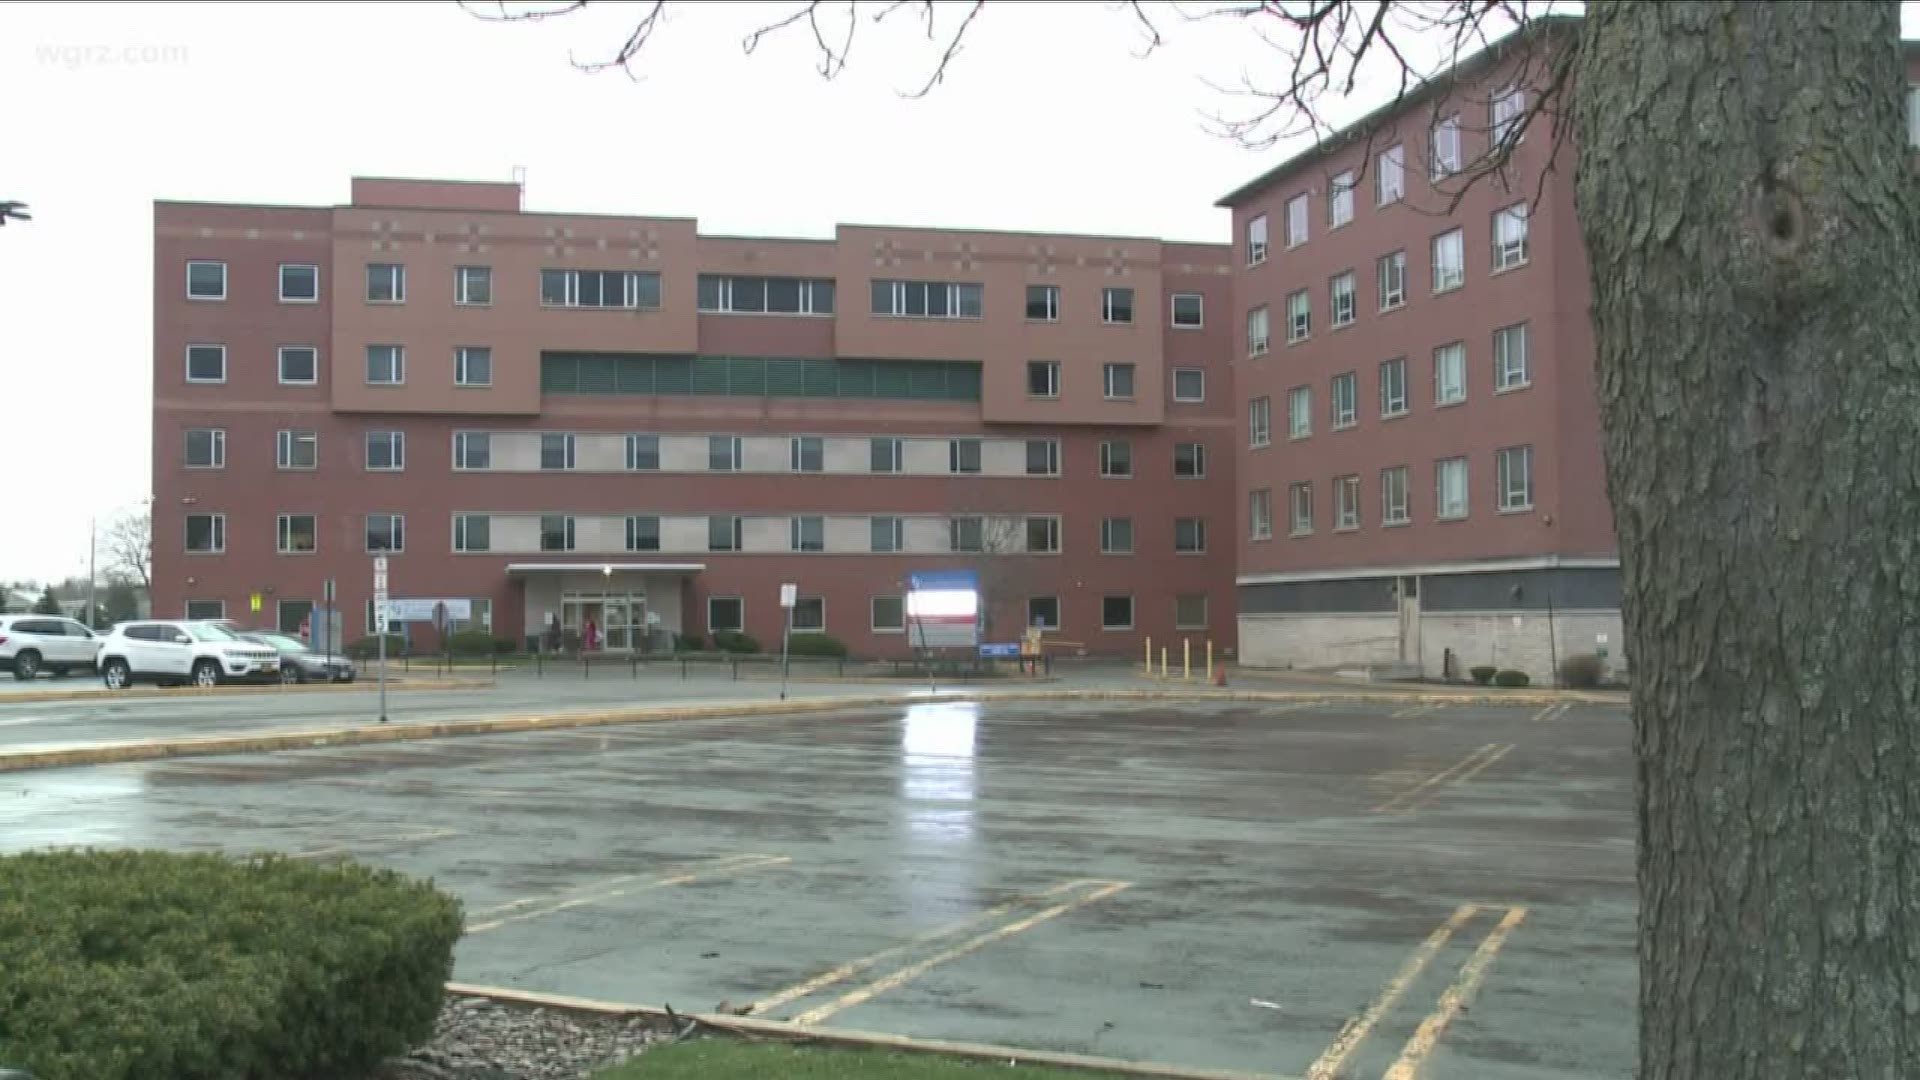 St. Catherine Labouré Health Care at Center on main street here in buffalo has 10 residents who tested positive.